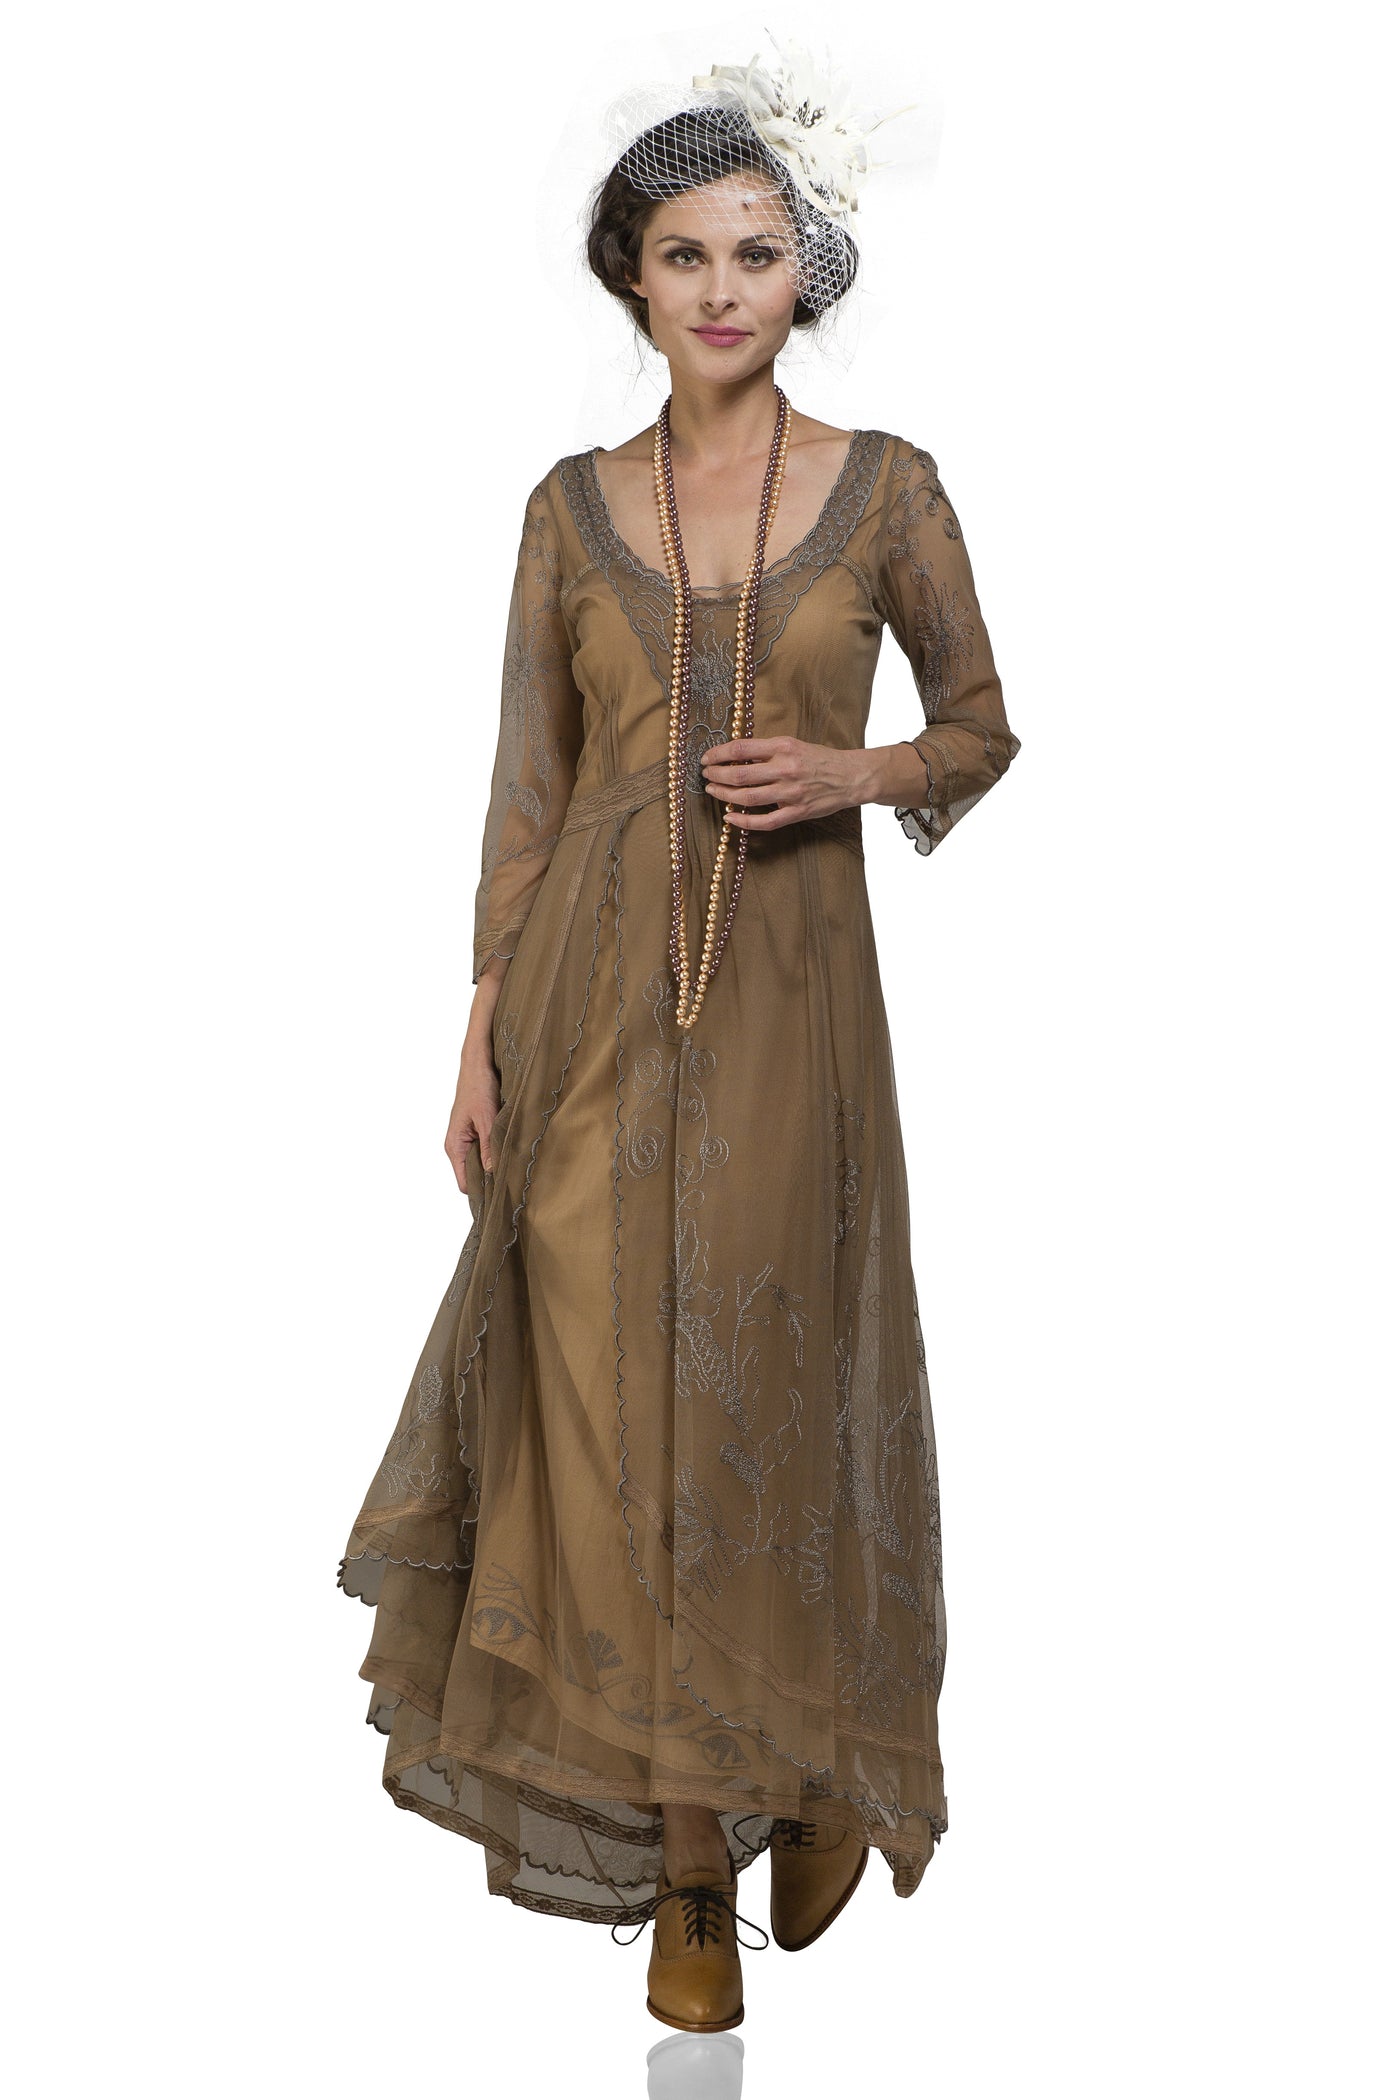 Downton Abbey Tea Party Gown 40163 in Antique Silver by Nataya